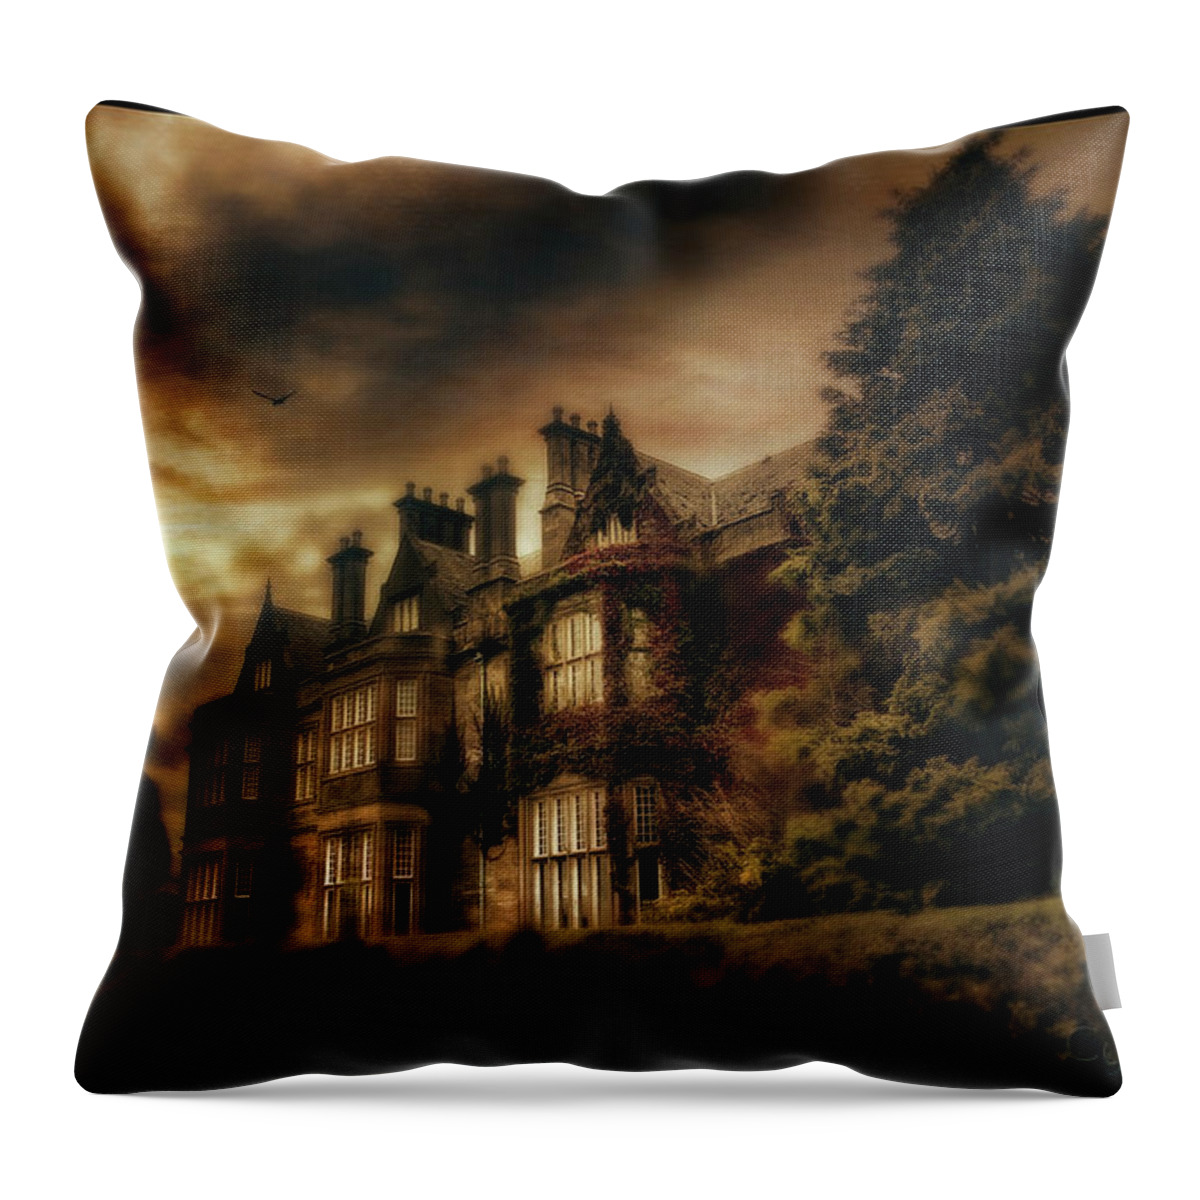 Ireland Throw Pillow featuring the photograph Muckross by Cybele Moon